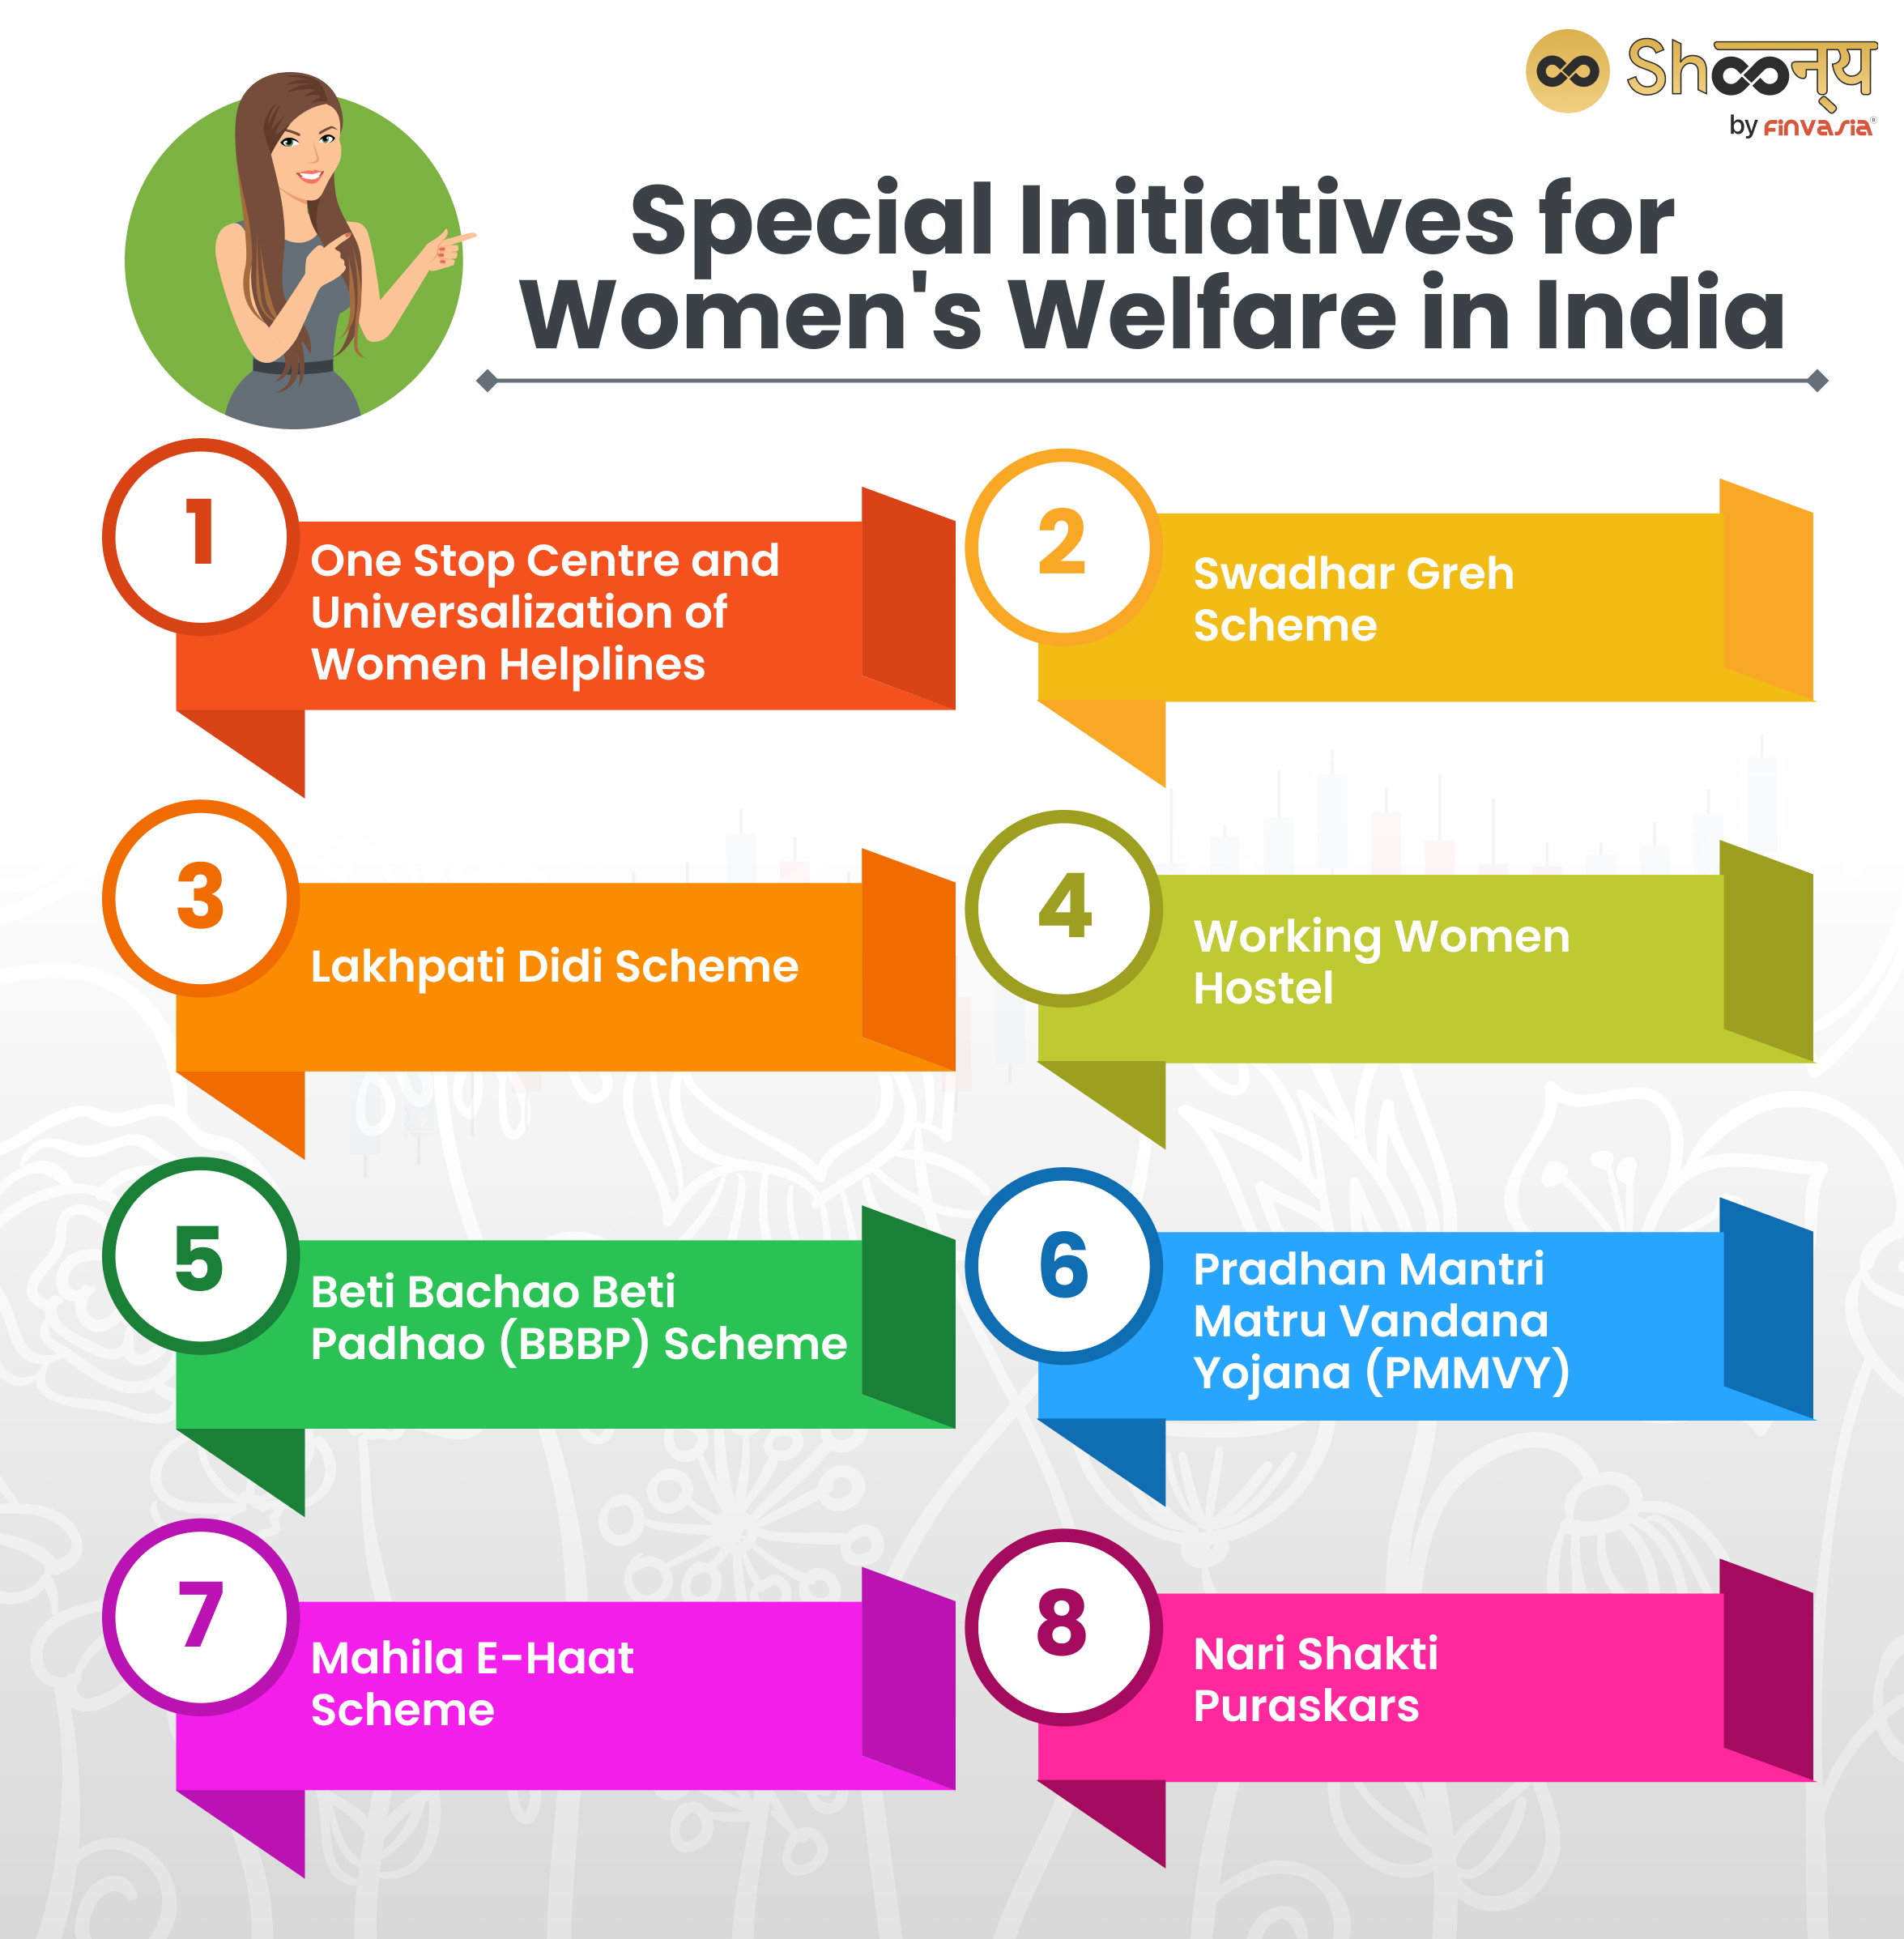 Special Initiatives for Women's Welfare in India
